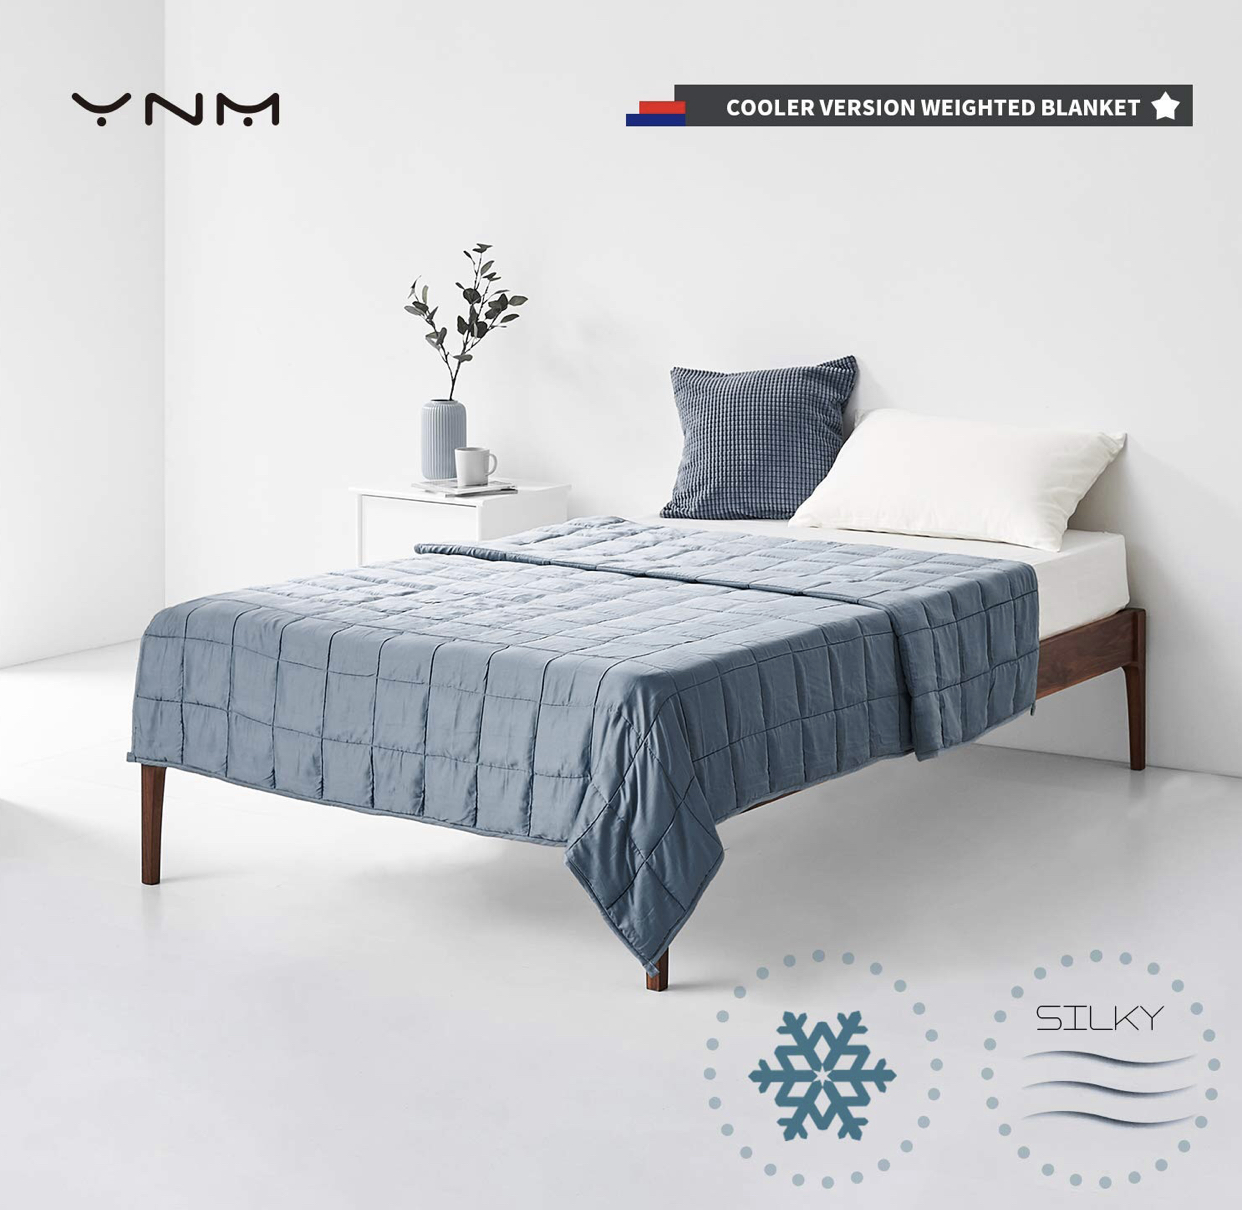 YnM Bamboo Weighted Blanket King Size 80”x87” $118.94 - Slickdeals.net